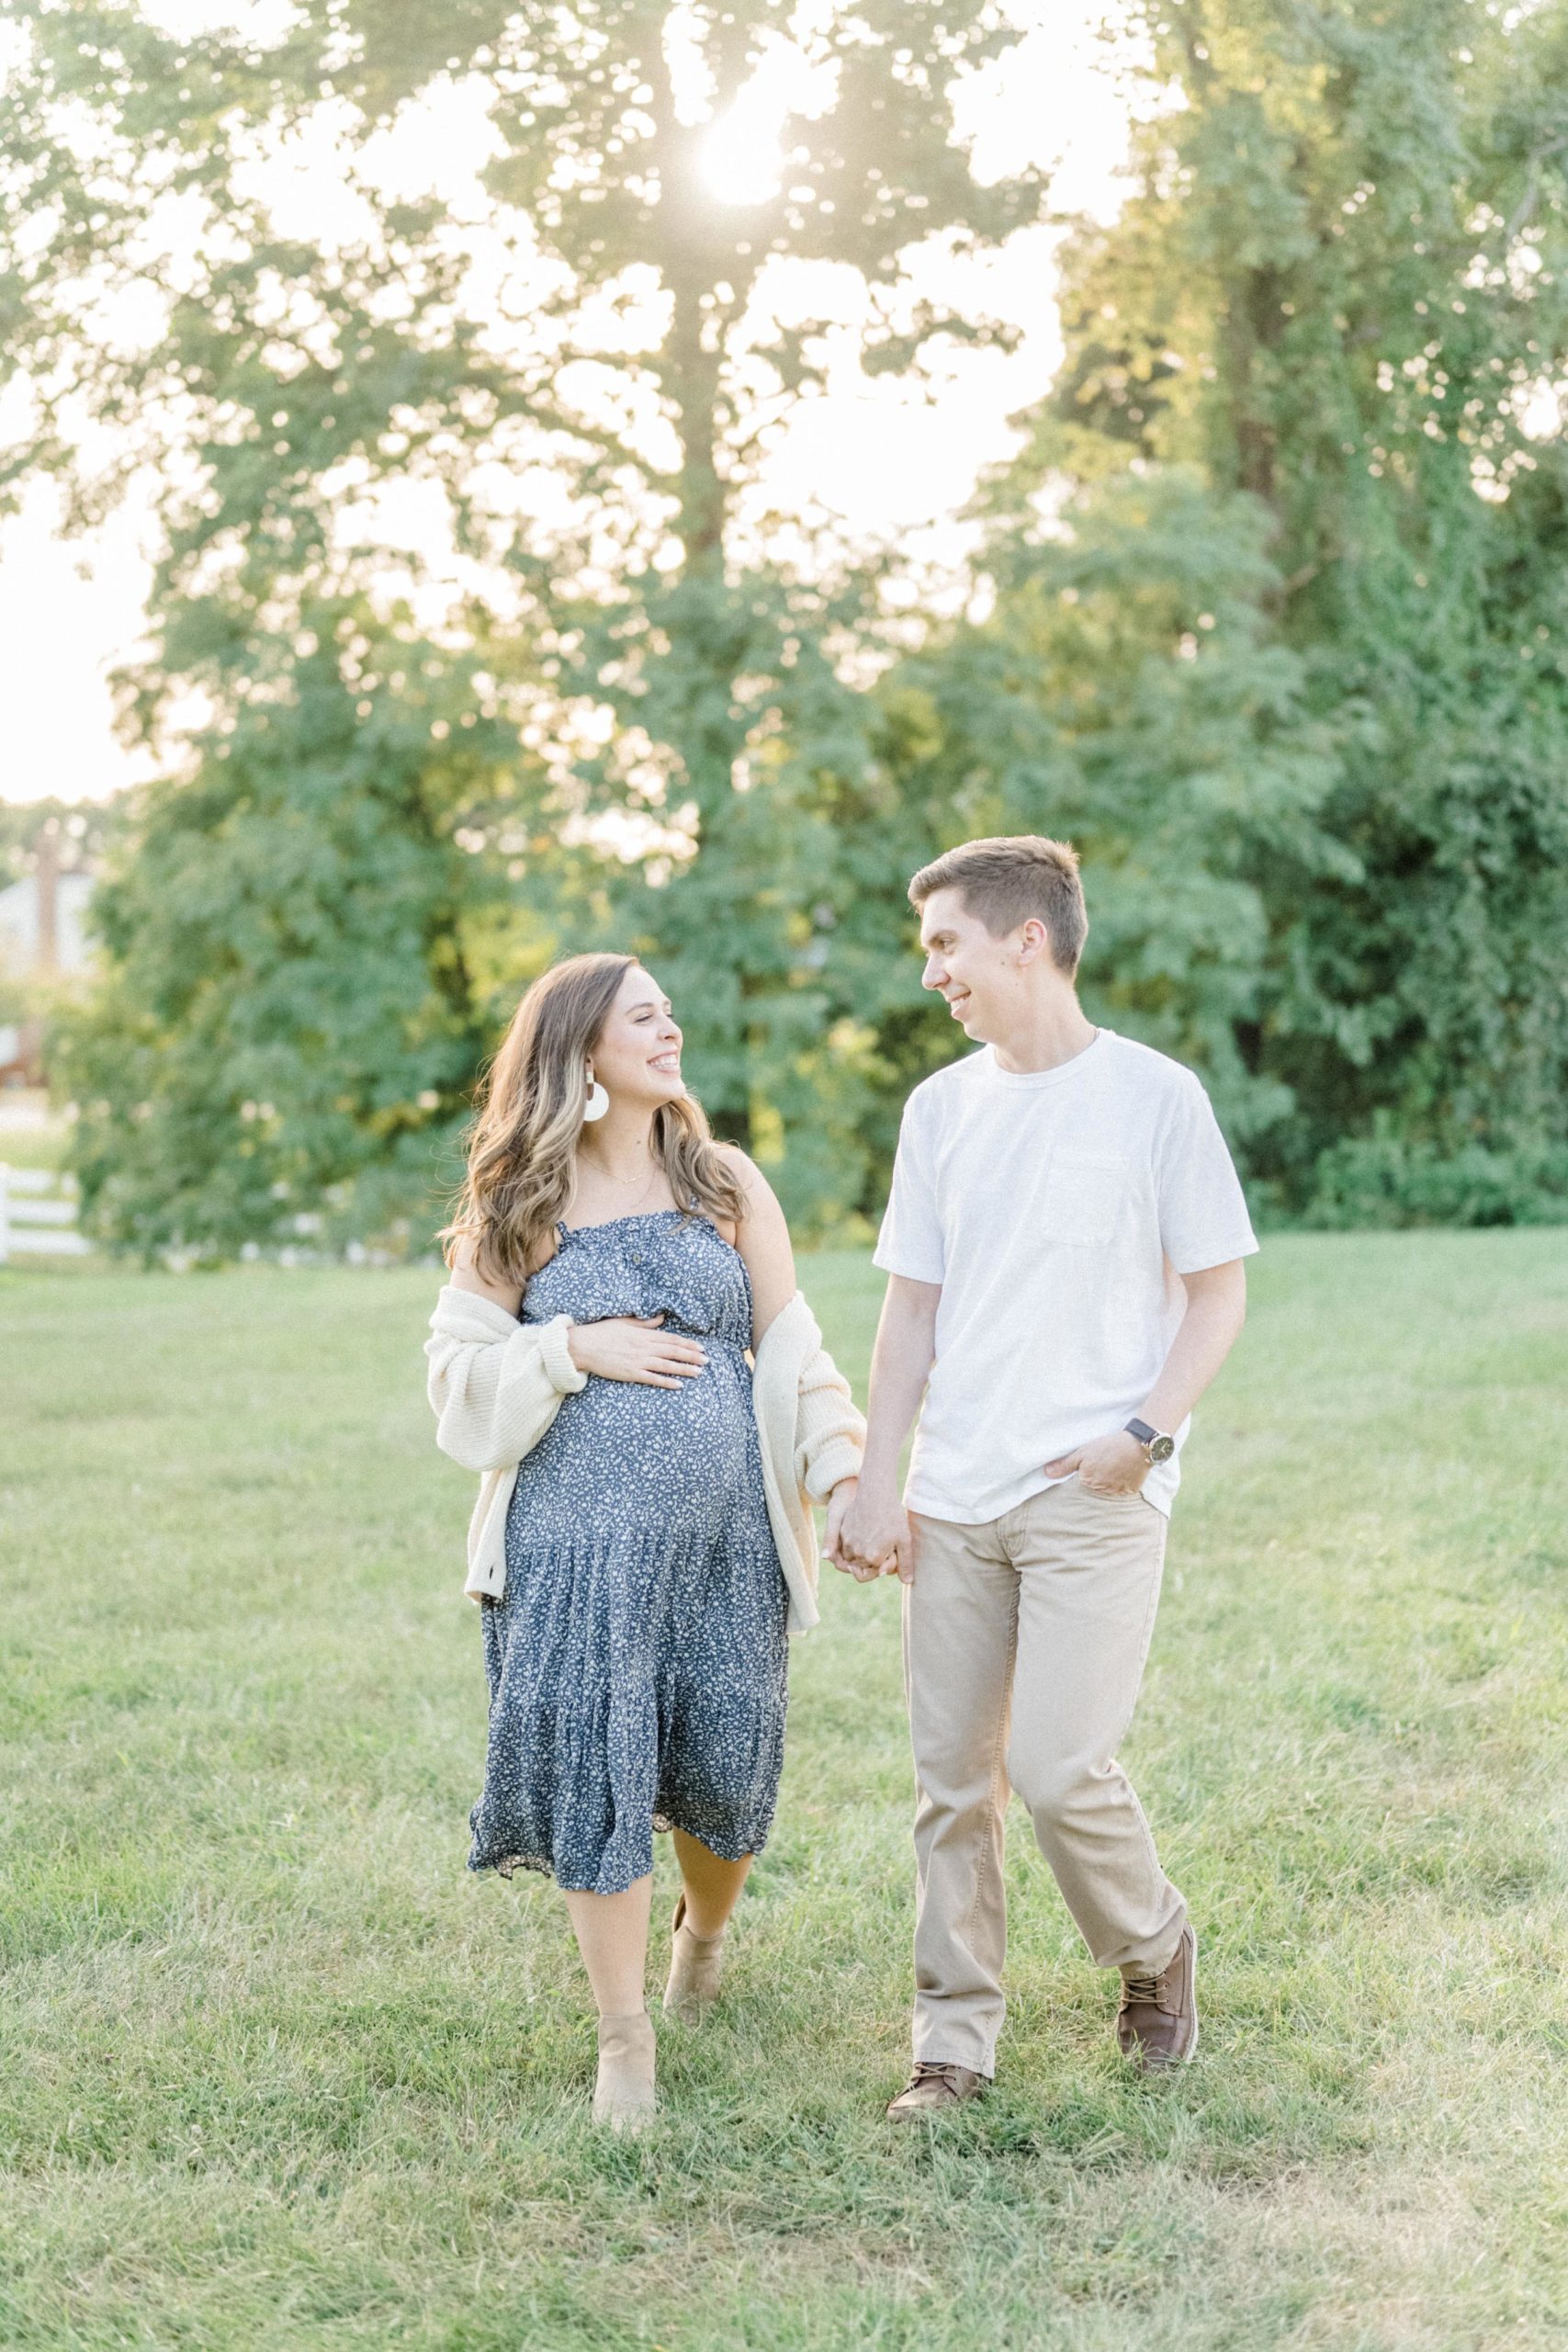 Odenton family and maternity photographer in the Annapolis, Maryland area.